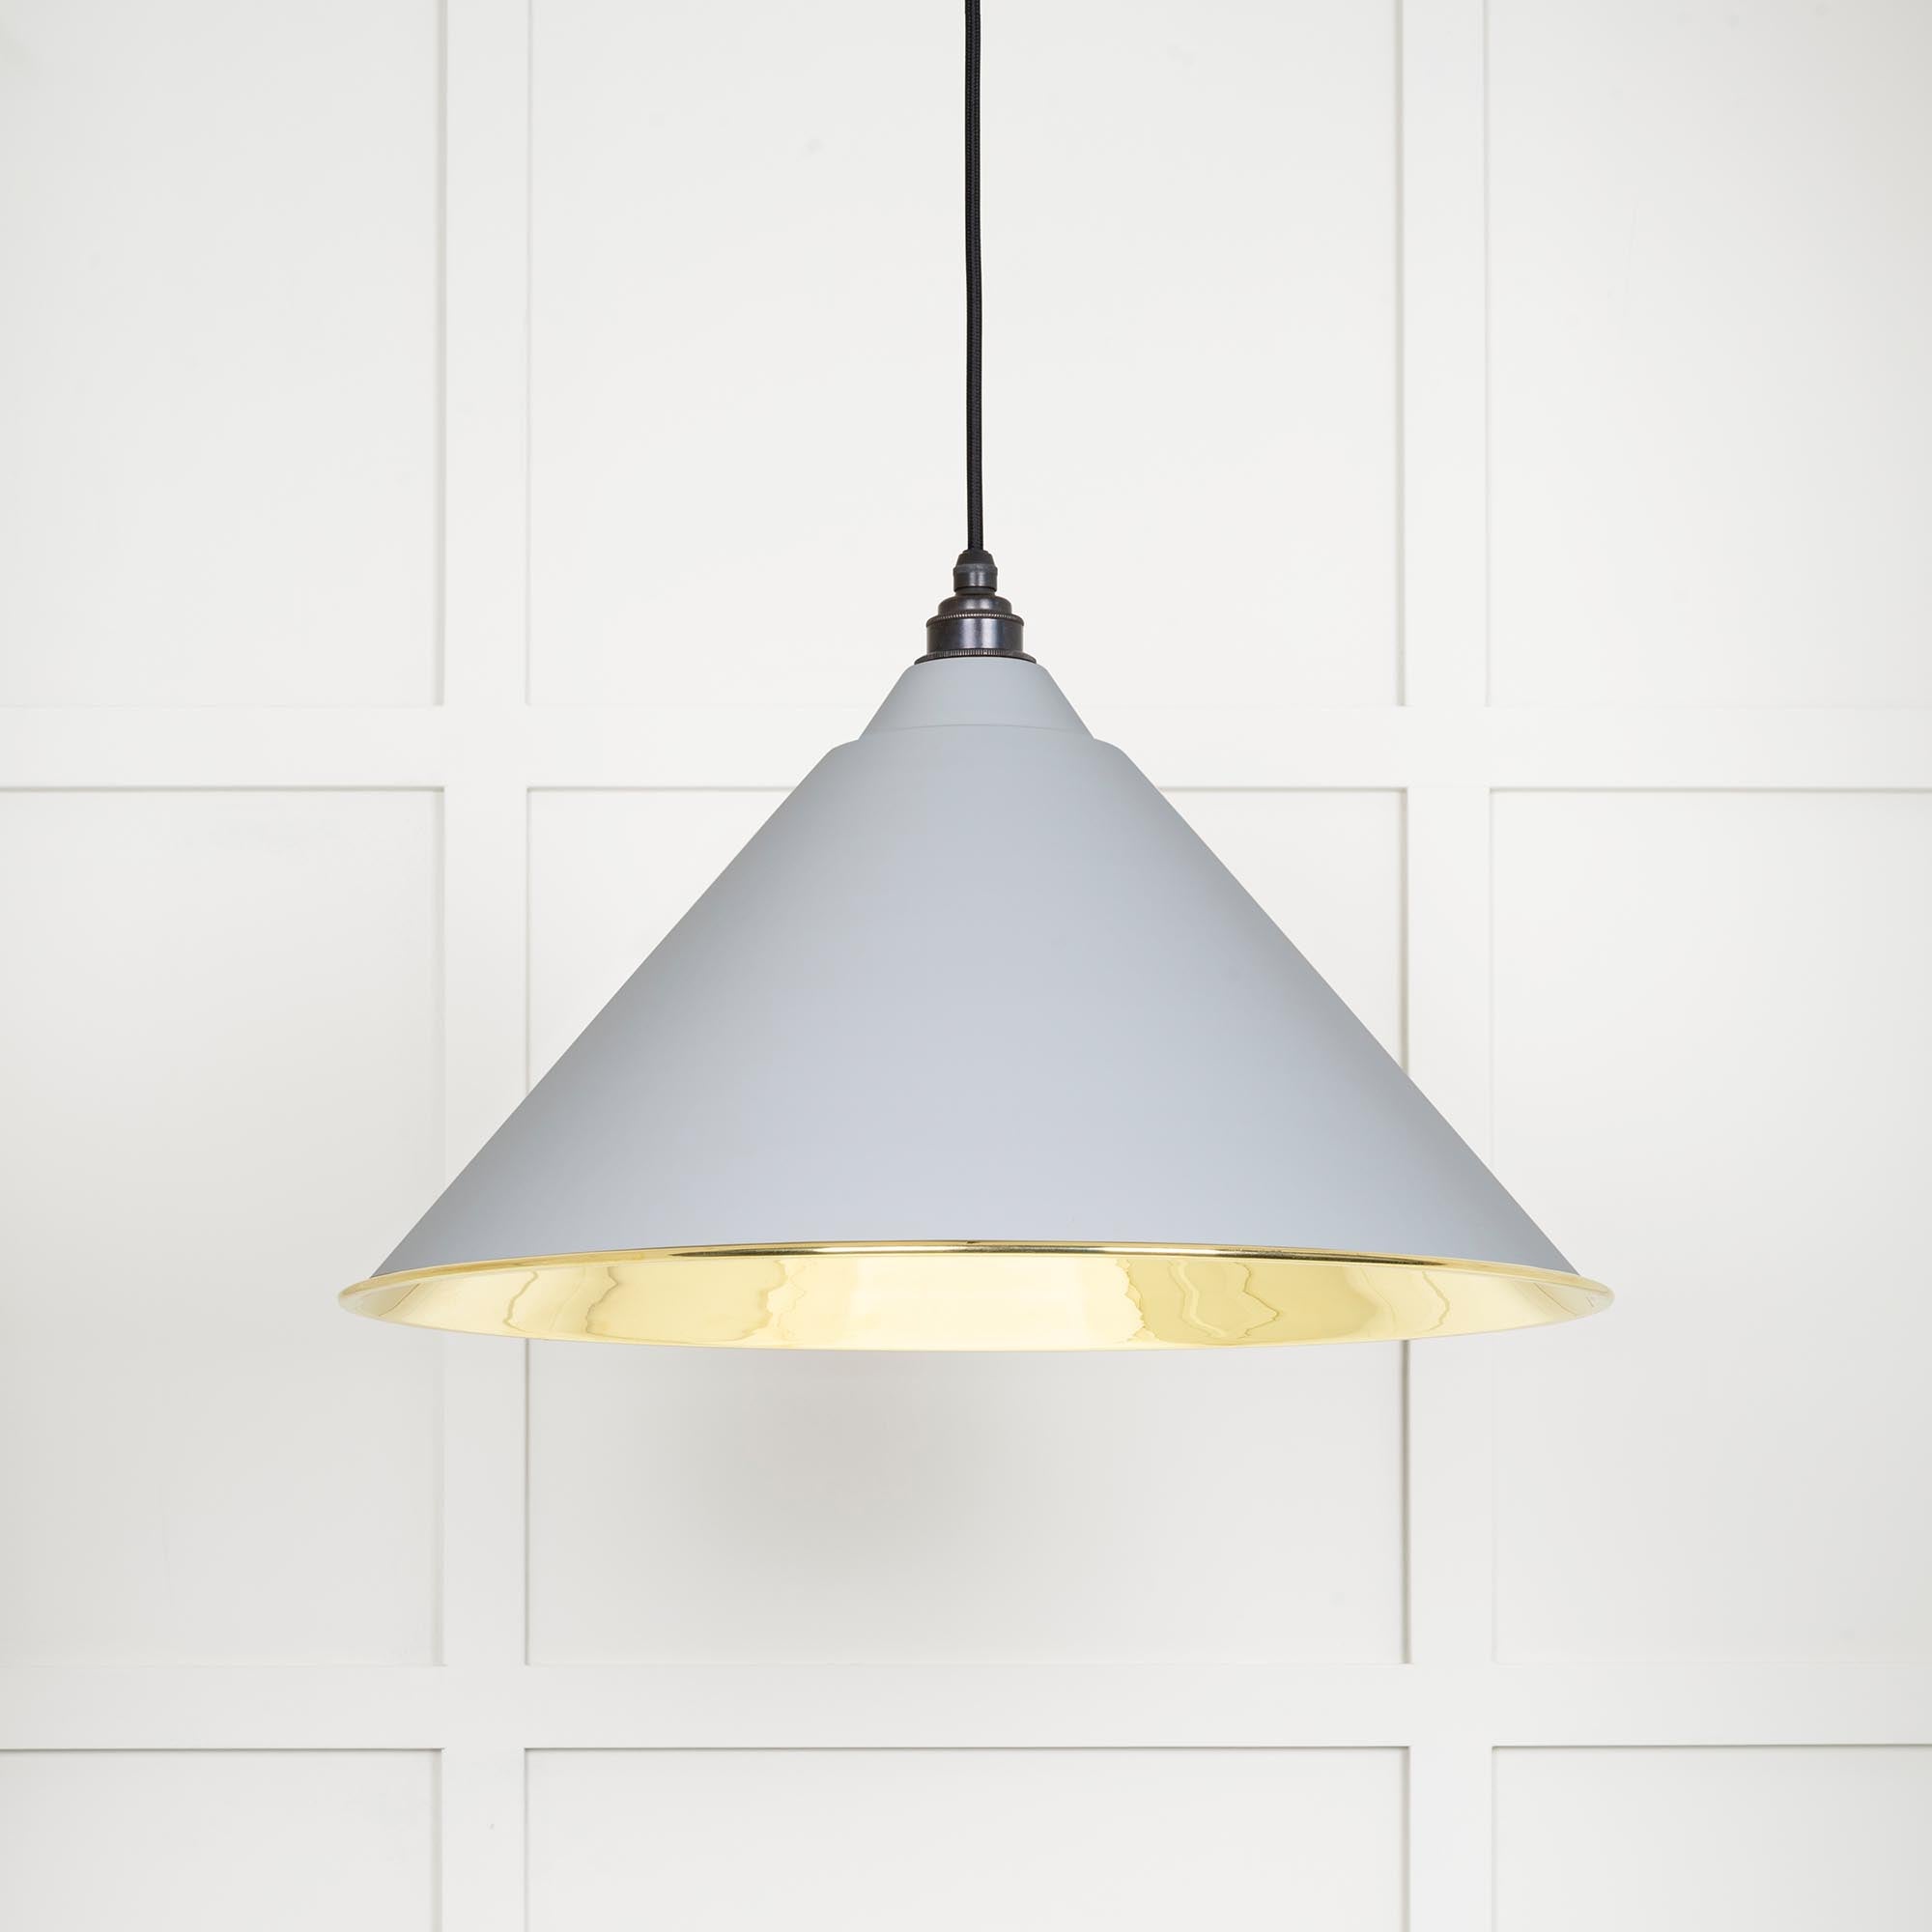 Image of Hockley Ceiling Light in Birch